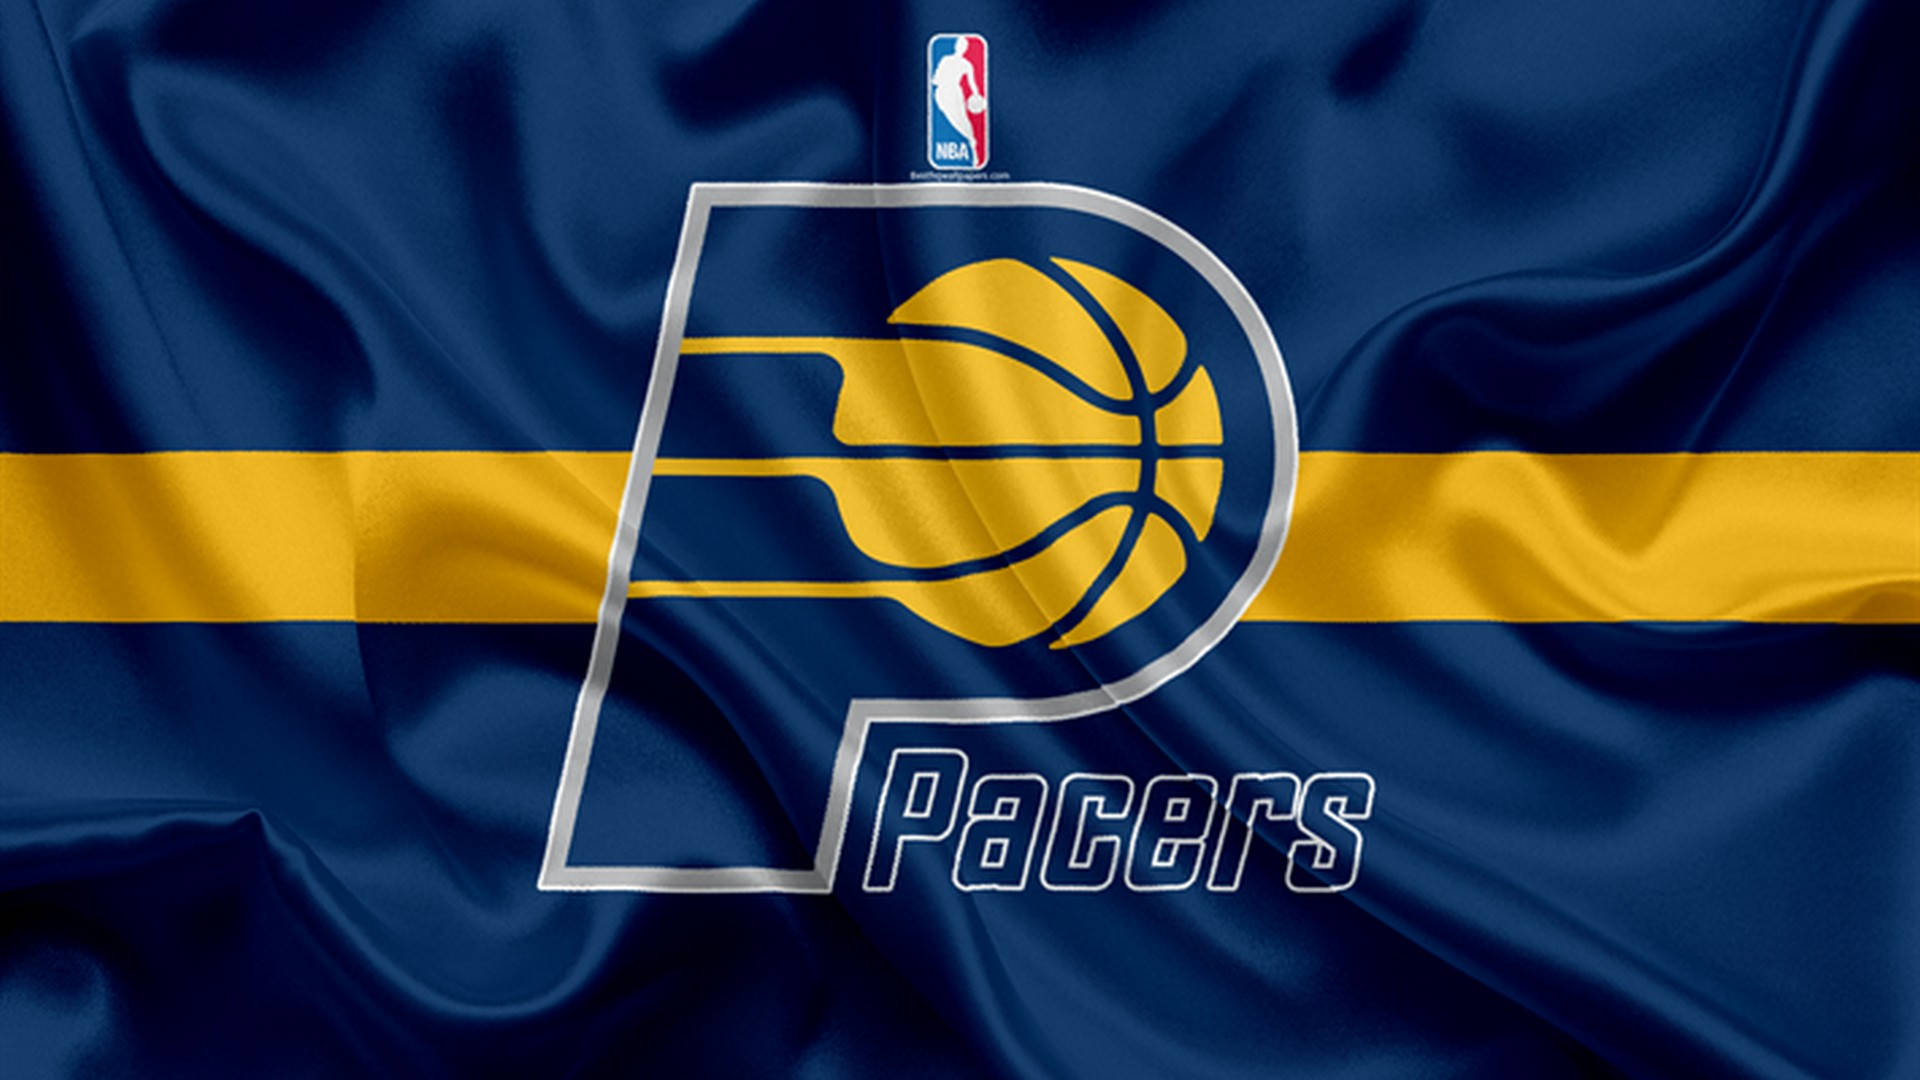 Indiana Pacers Logo Flag Wallpaper